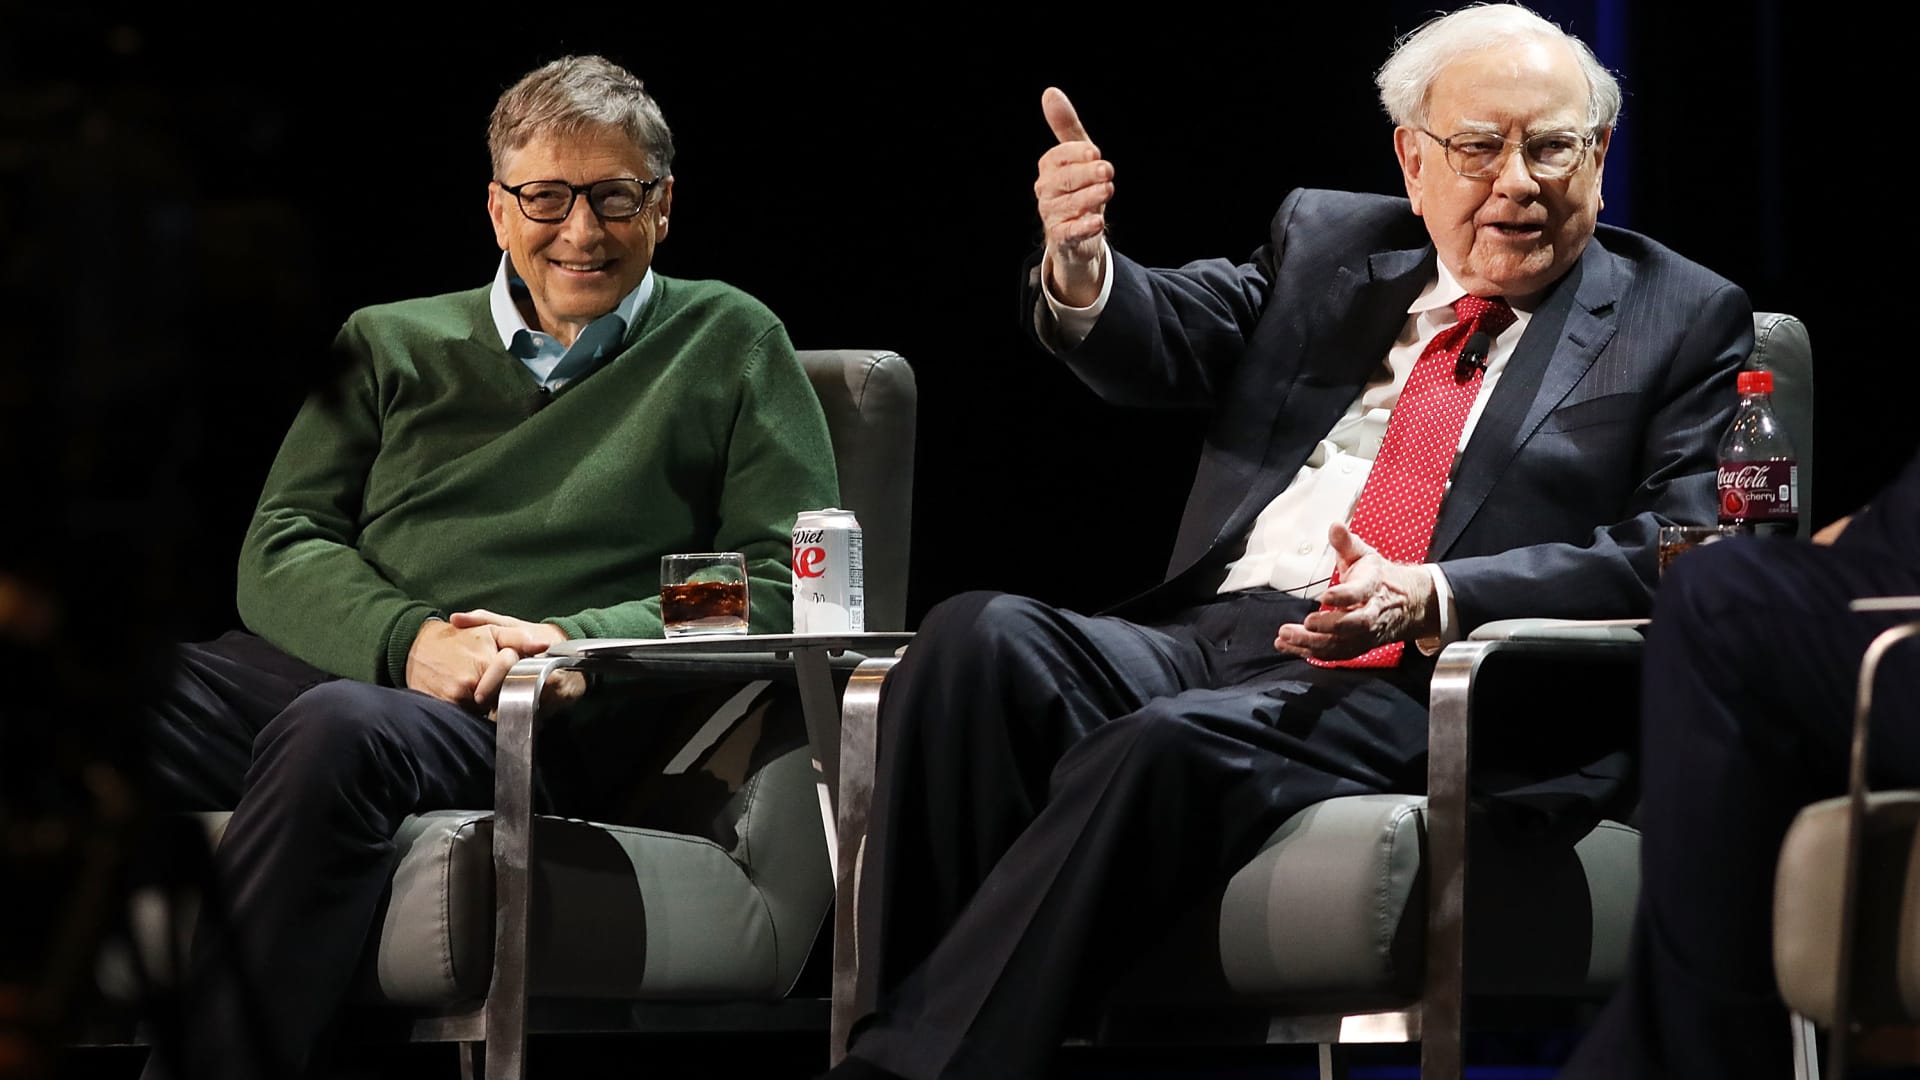 Bill Gates and Warren Buffett have a combined net worth of $232 billion, according to the Bloomberg Billionaires Index.